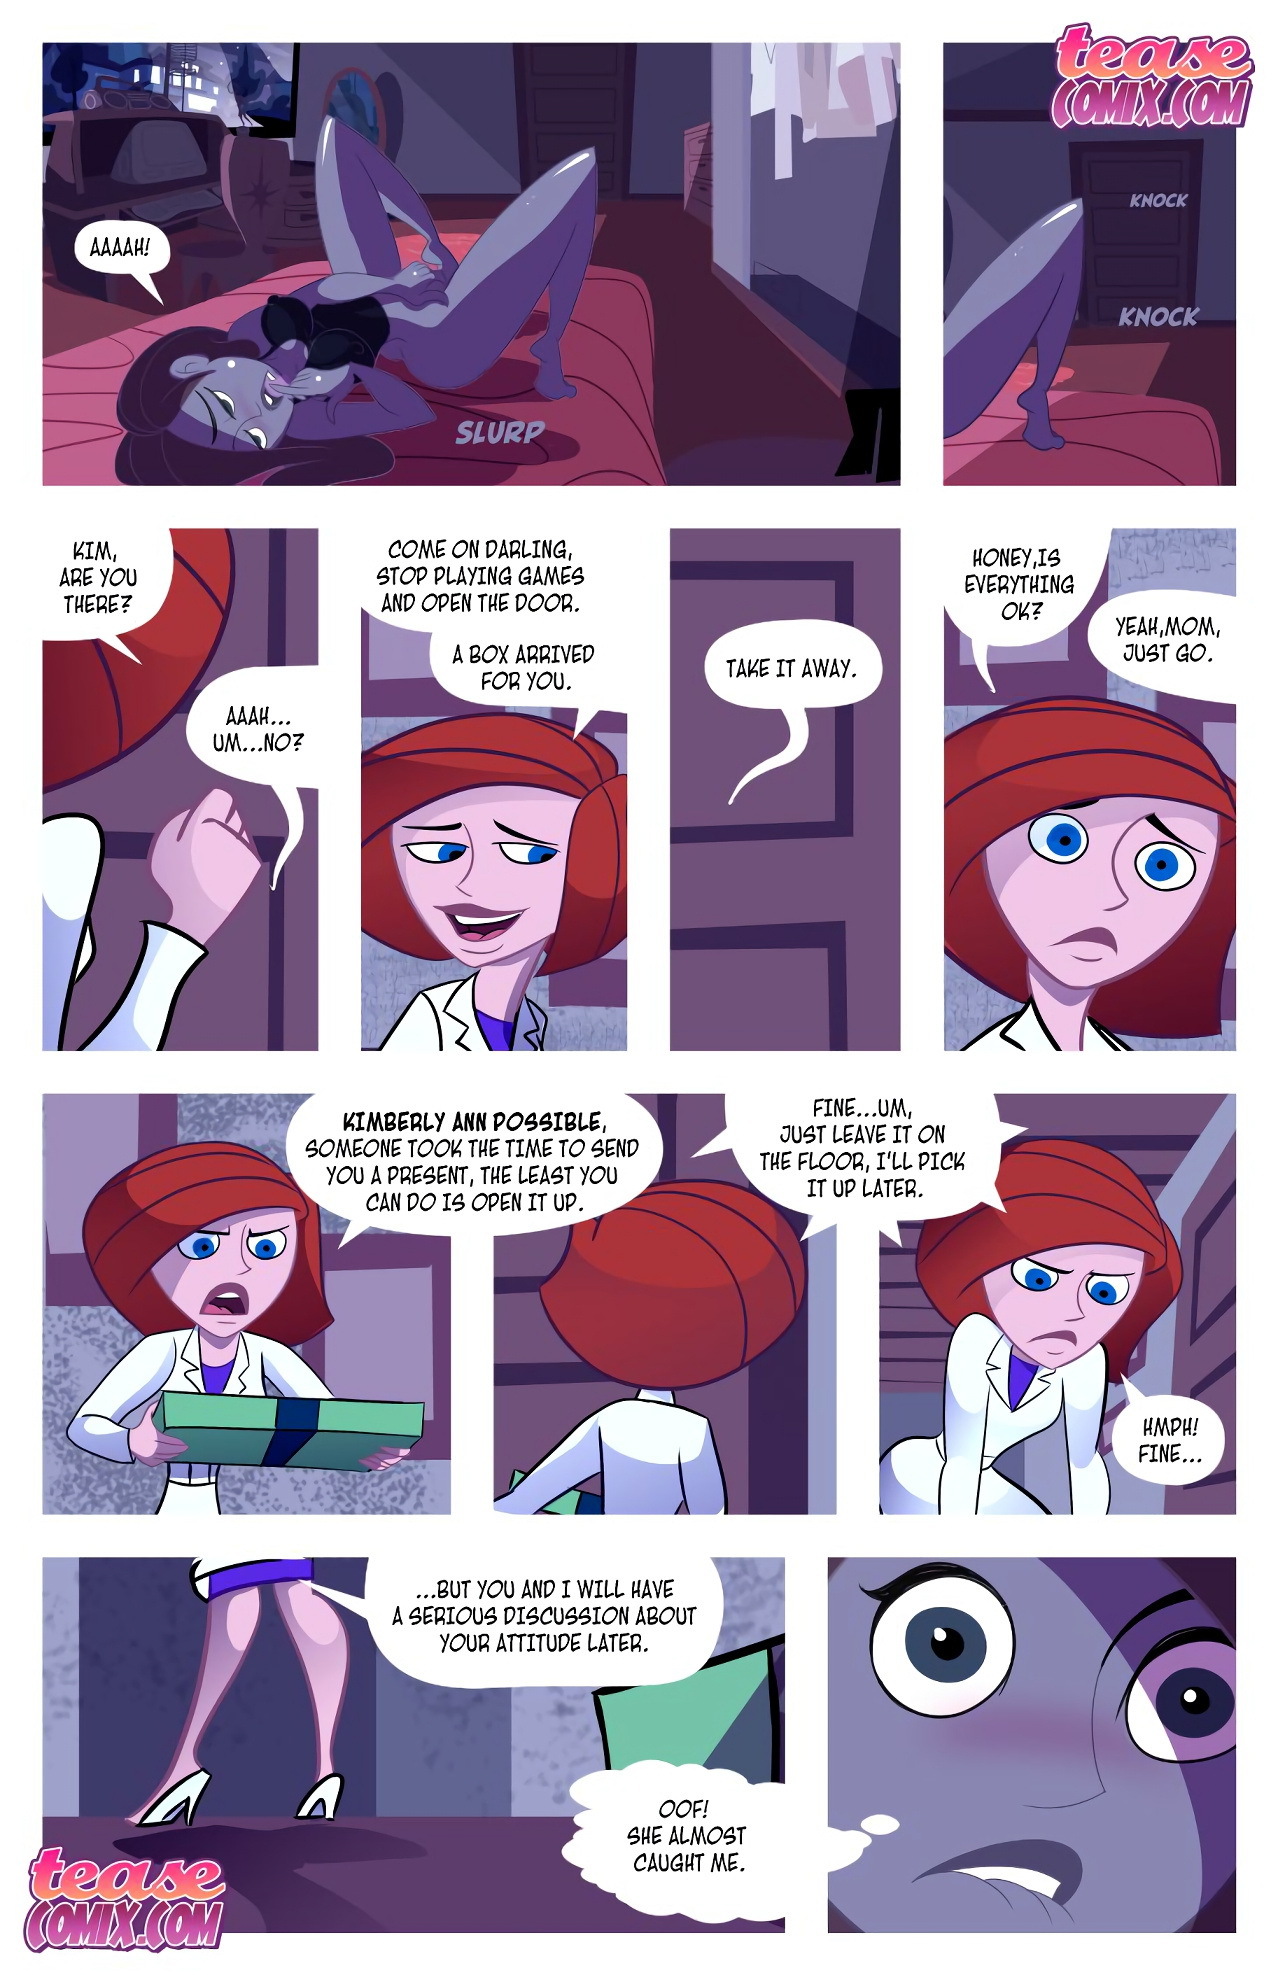 Kinky Possible - A Villain's Bitch Remastered - Page 21